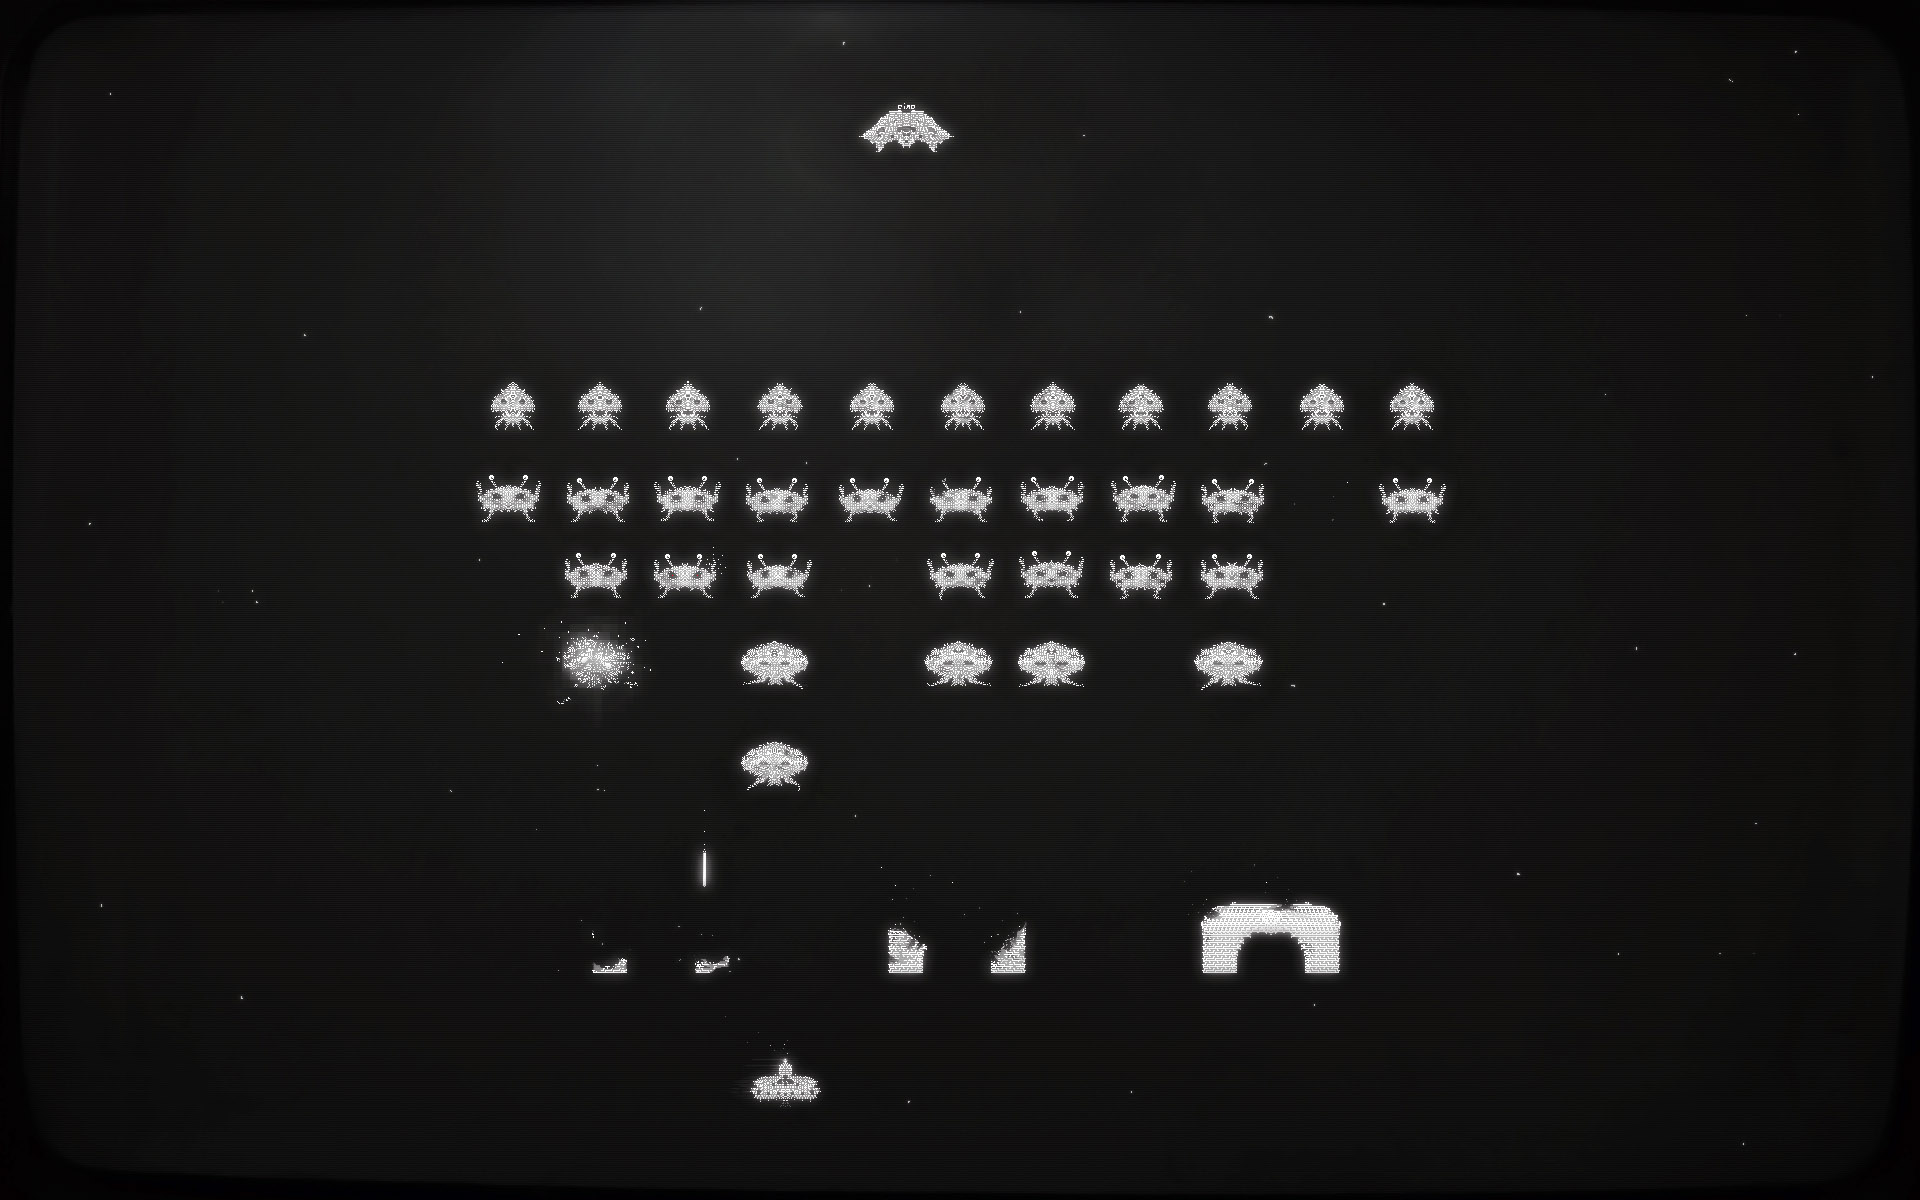 Space Invaders, Video Games Wallpaper